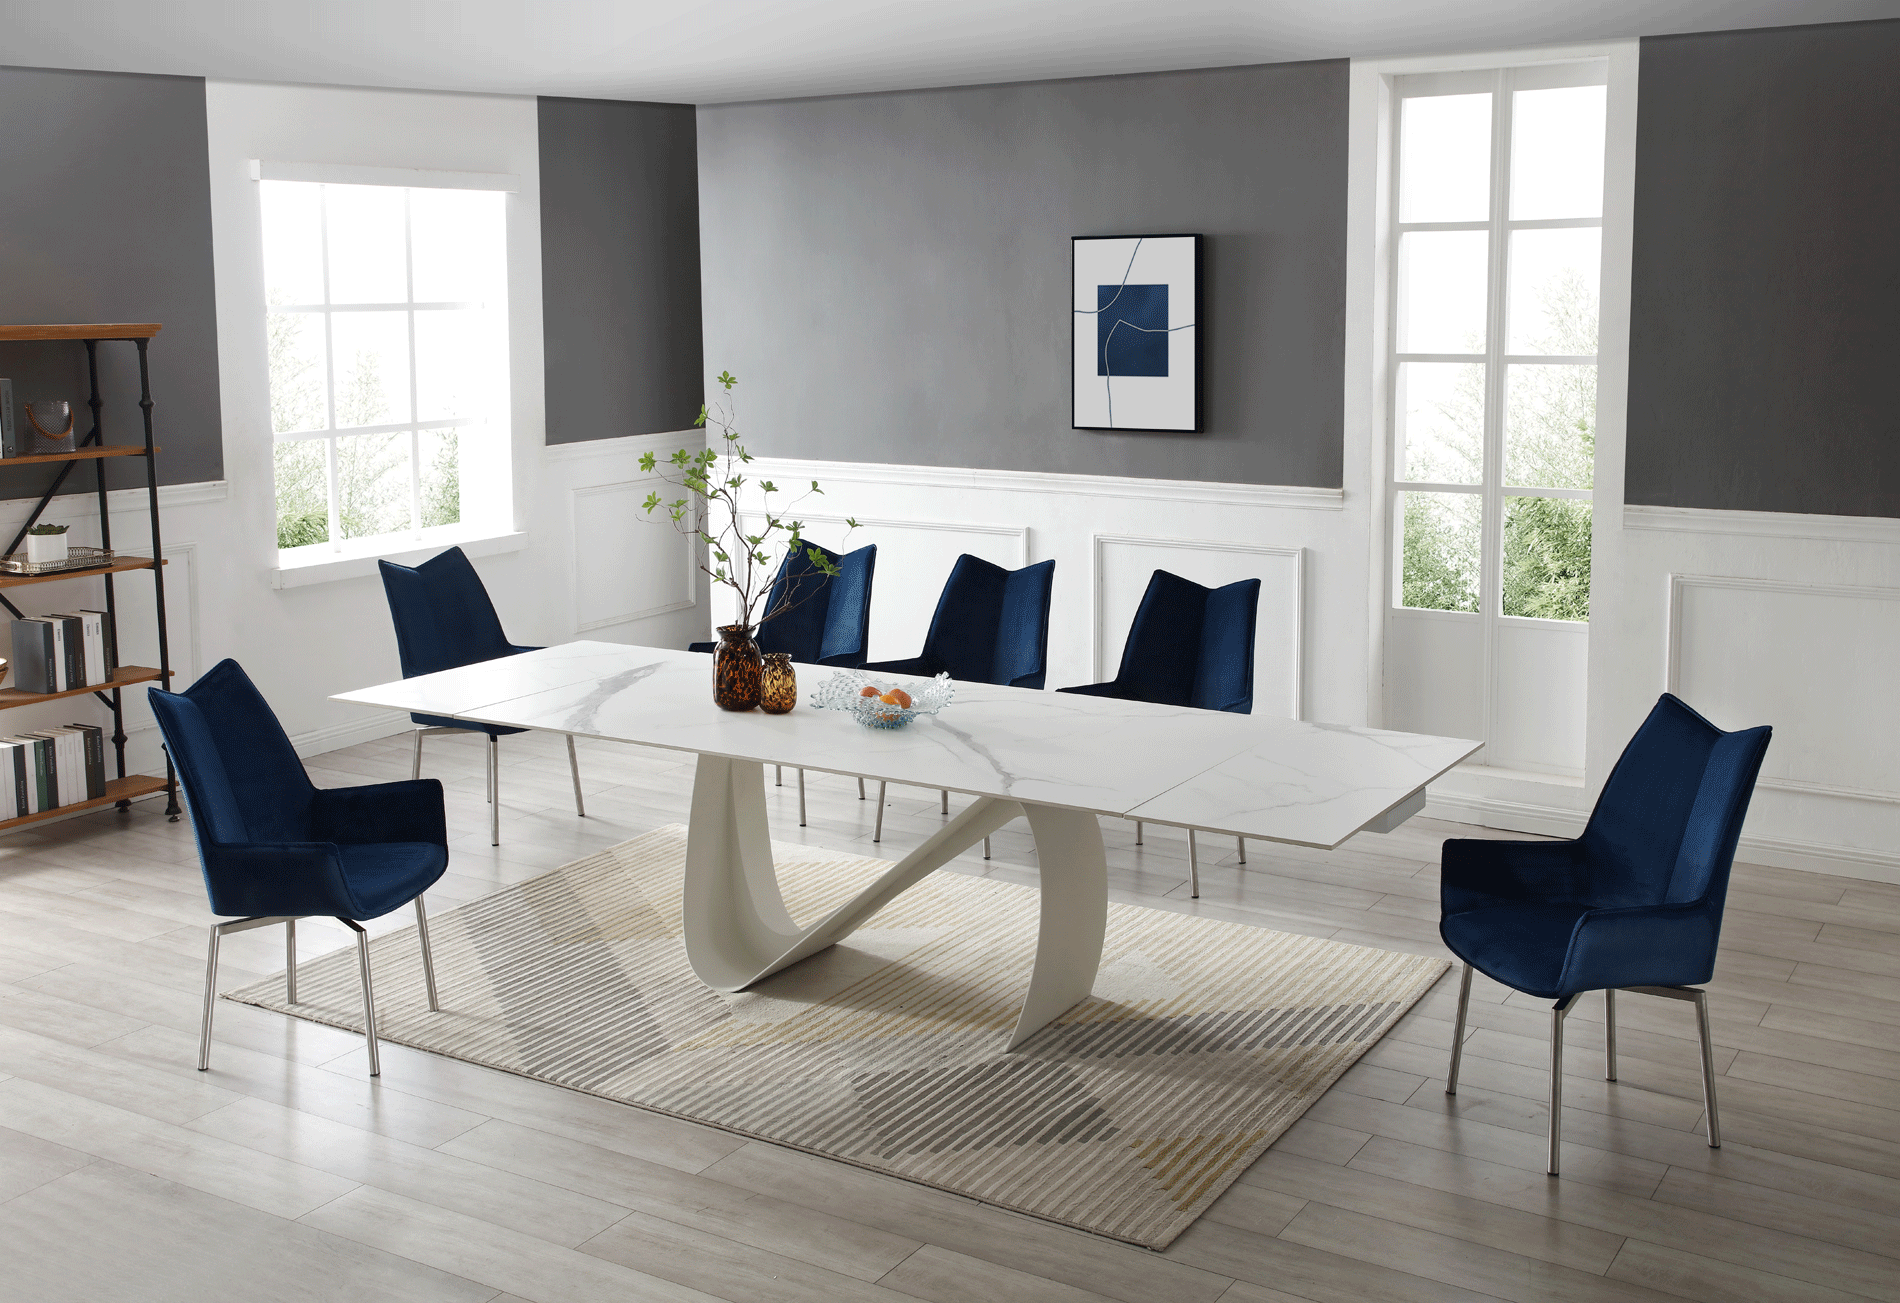 Dining Room Furniture Kitchen Tables and Chairs Sets 9087 Table White with 1218 swivel blue chair